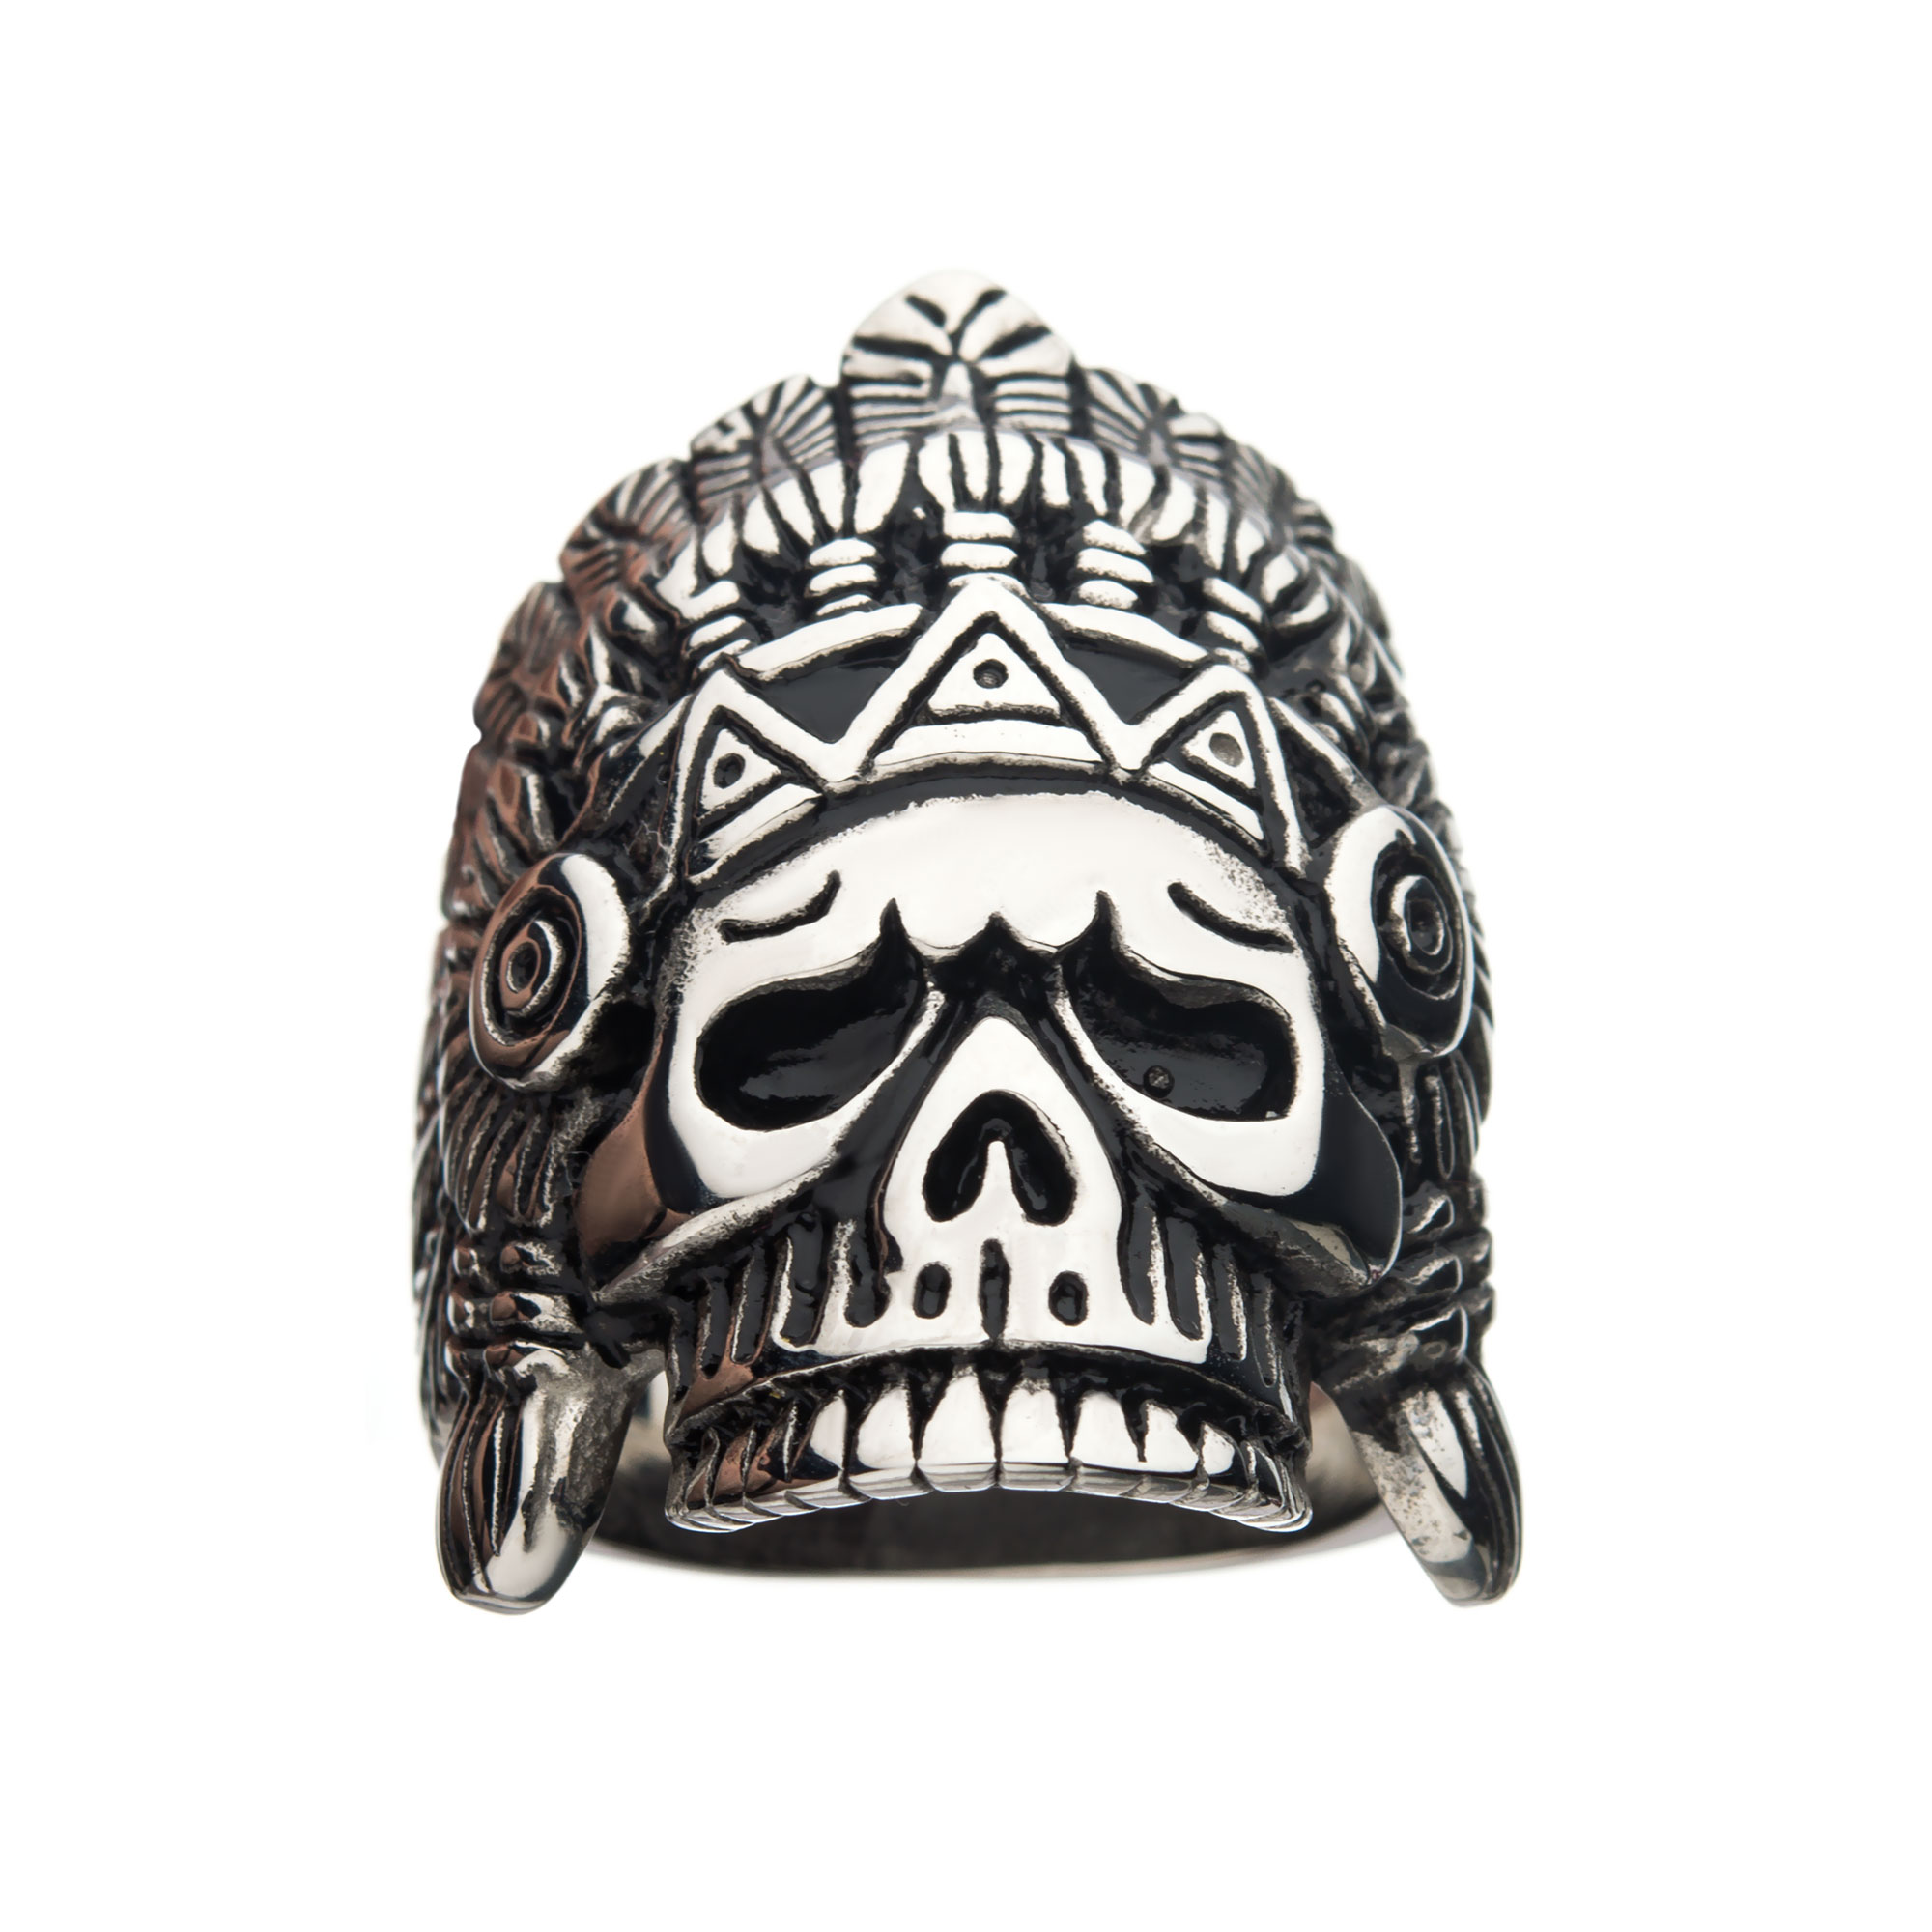 Oxidized Stainless Steel Chief Skull Ring Image 2 Thurber's Fine Jewelry Wadsworth, OH